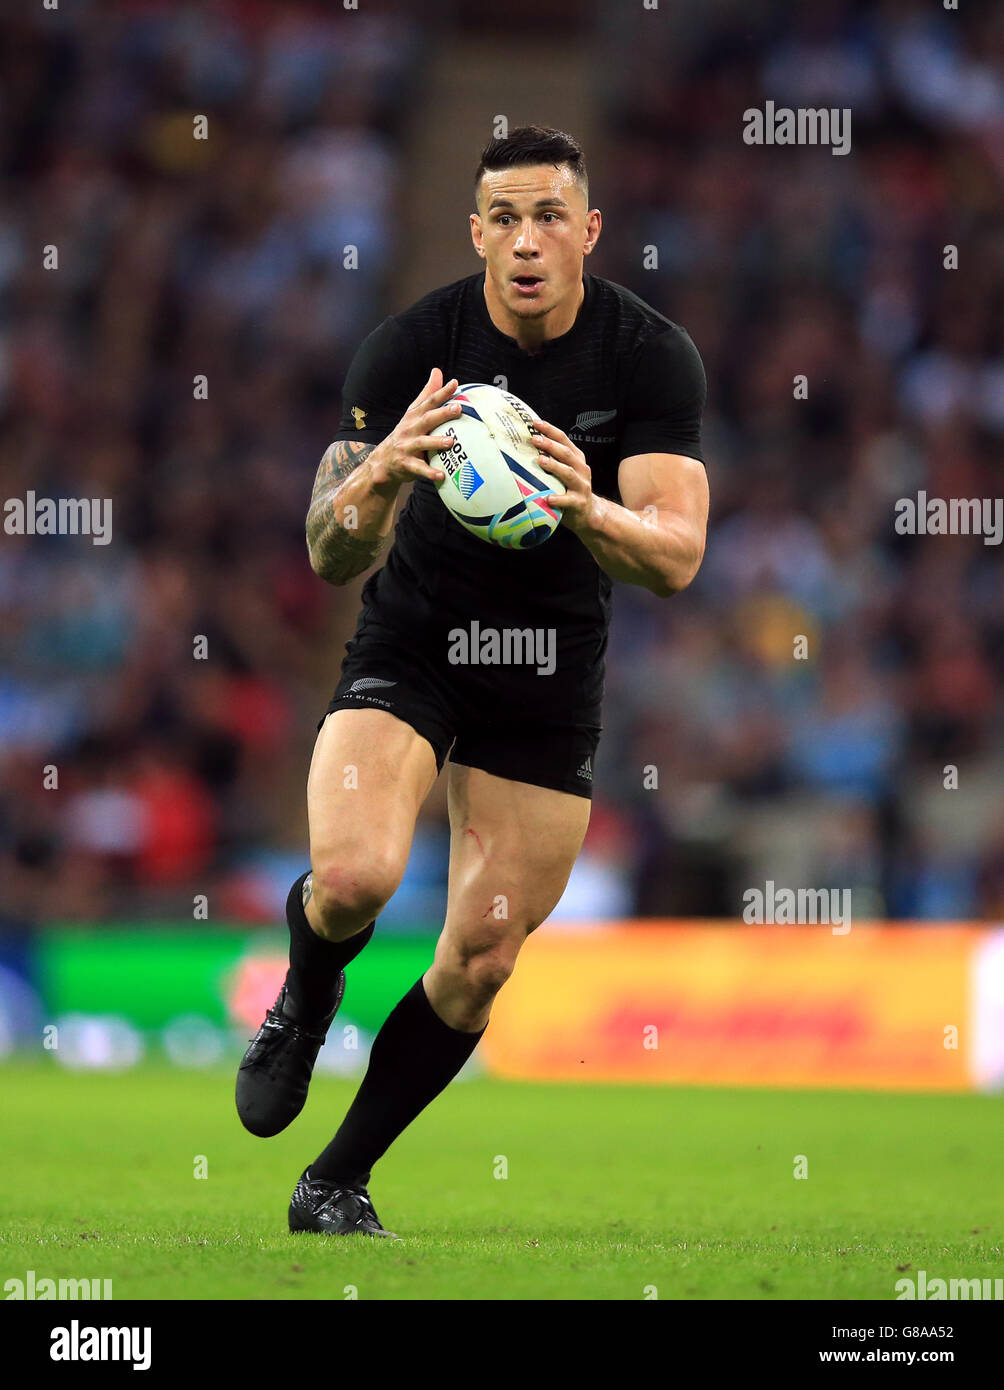 New Zealand's Sonny Bill Williams during the Rugby World Cup match at Wembley Stadium, London. PRESS ASSOCIATION Photo. Picture date: Sunday September 20, 2015. See PA story RUGBYU New Zealand. Photo credit should read: Mike Egerton/PA Wire. Stock Photo